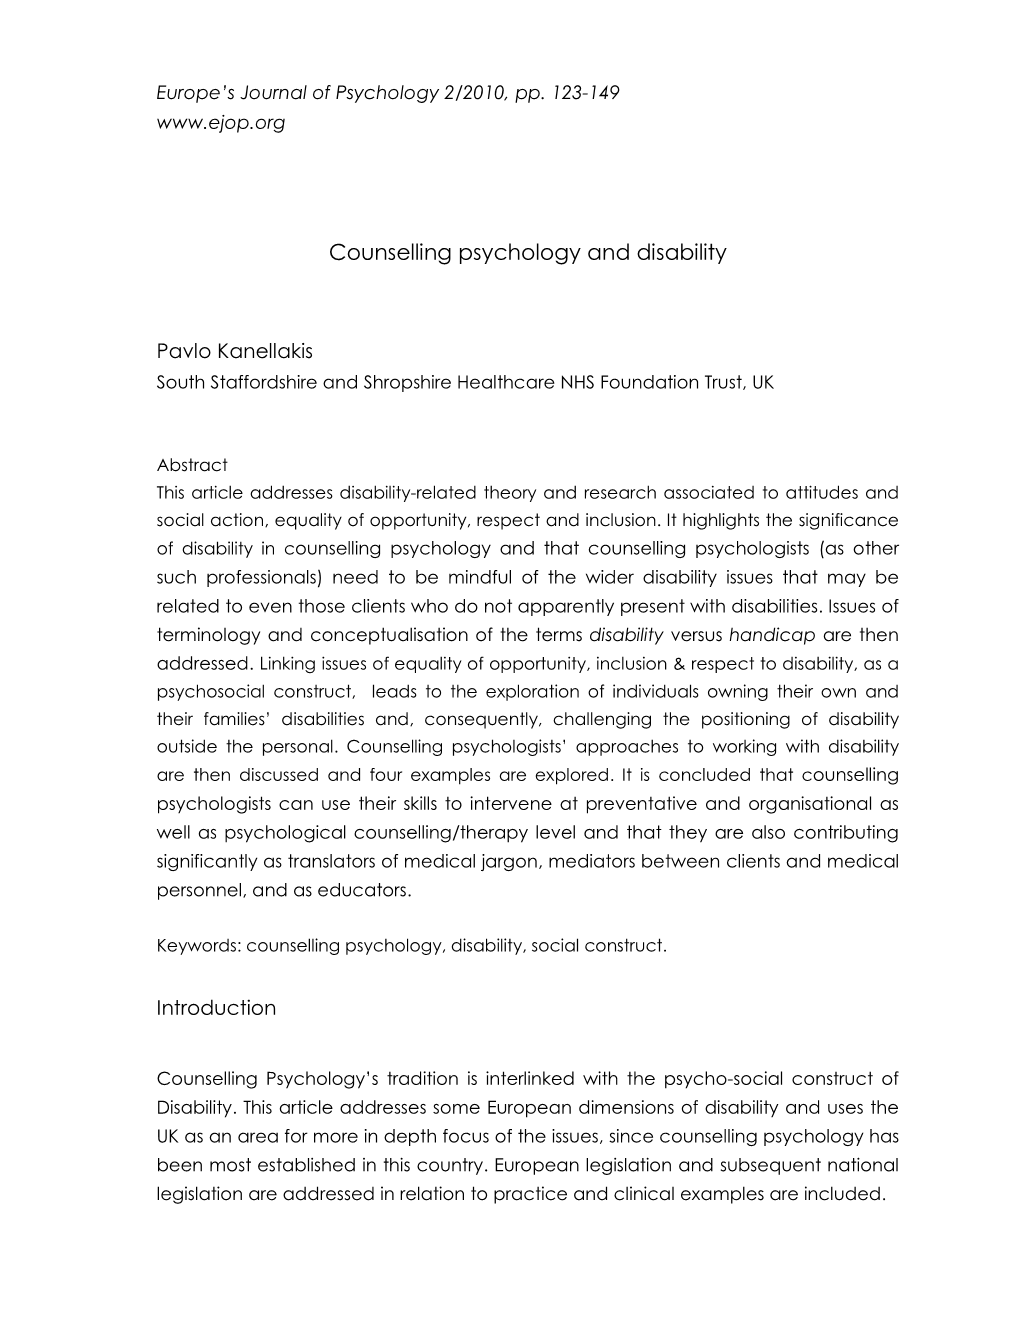 Counselling Psychology and Disability